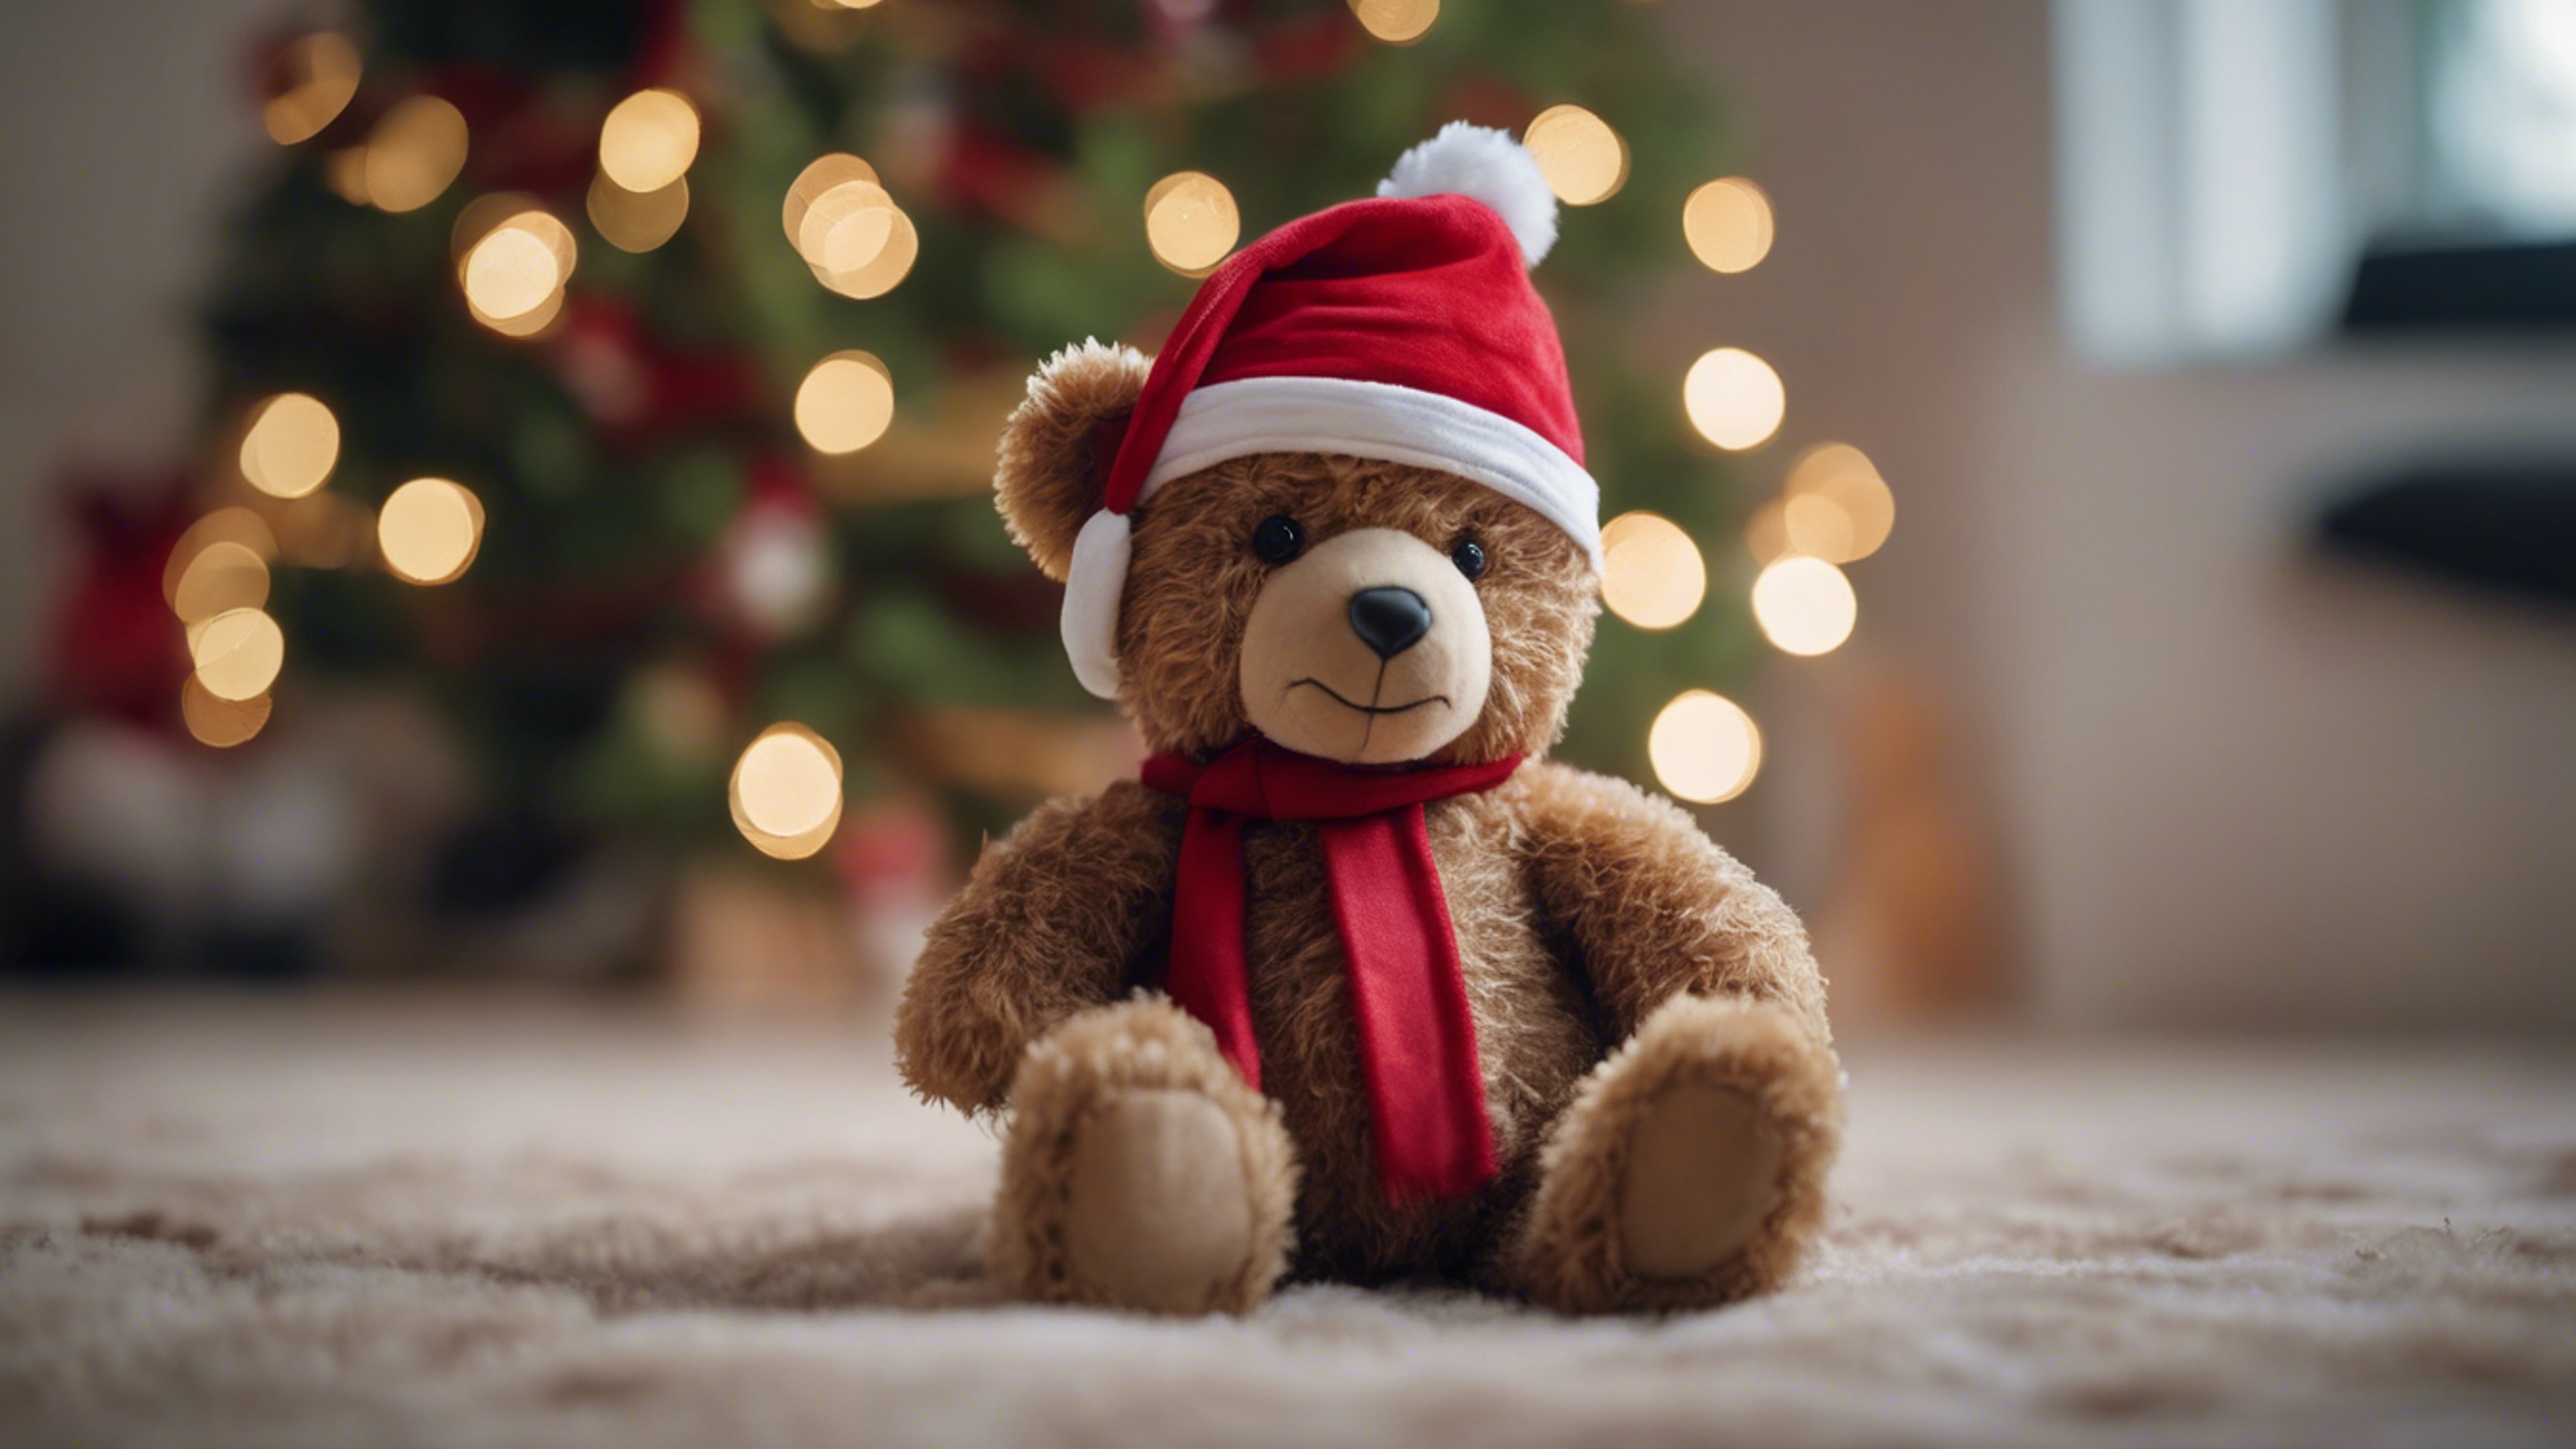 A teddy bear wearing a red Christmas hat, sitting next to a Christmas tree. Обои[764052ee6d604b67a698]